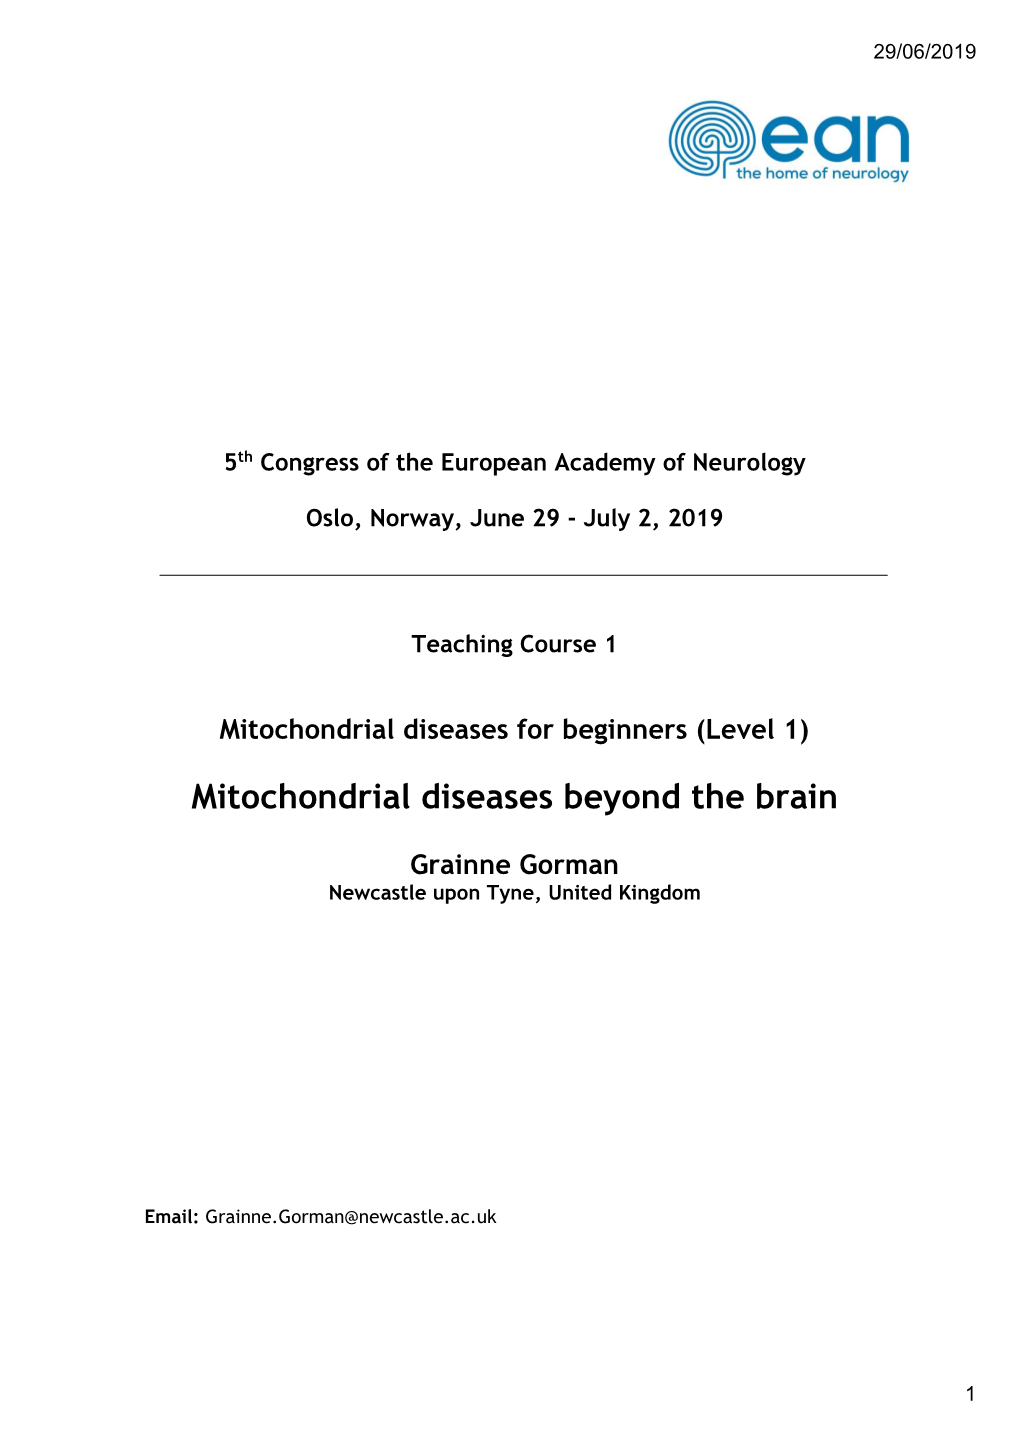 Mitochondrial Diseases Beyond the Brain